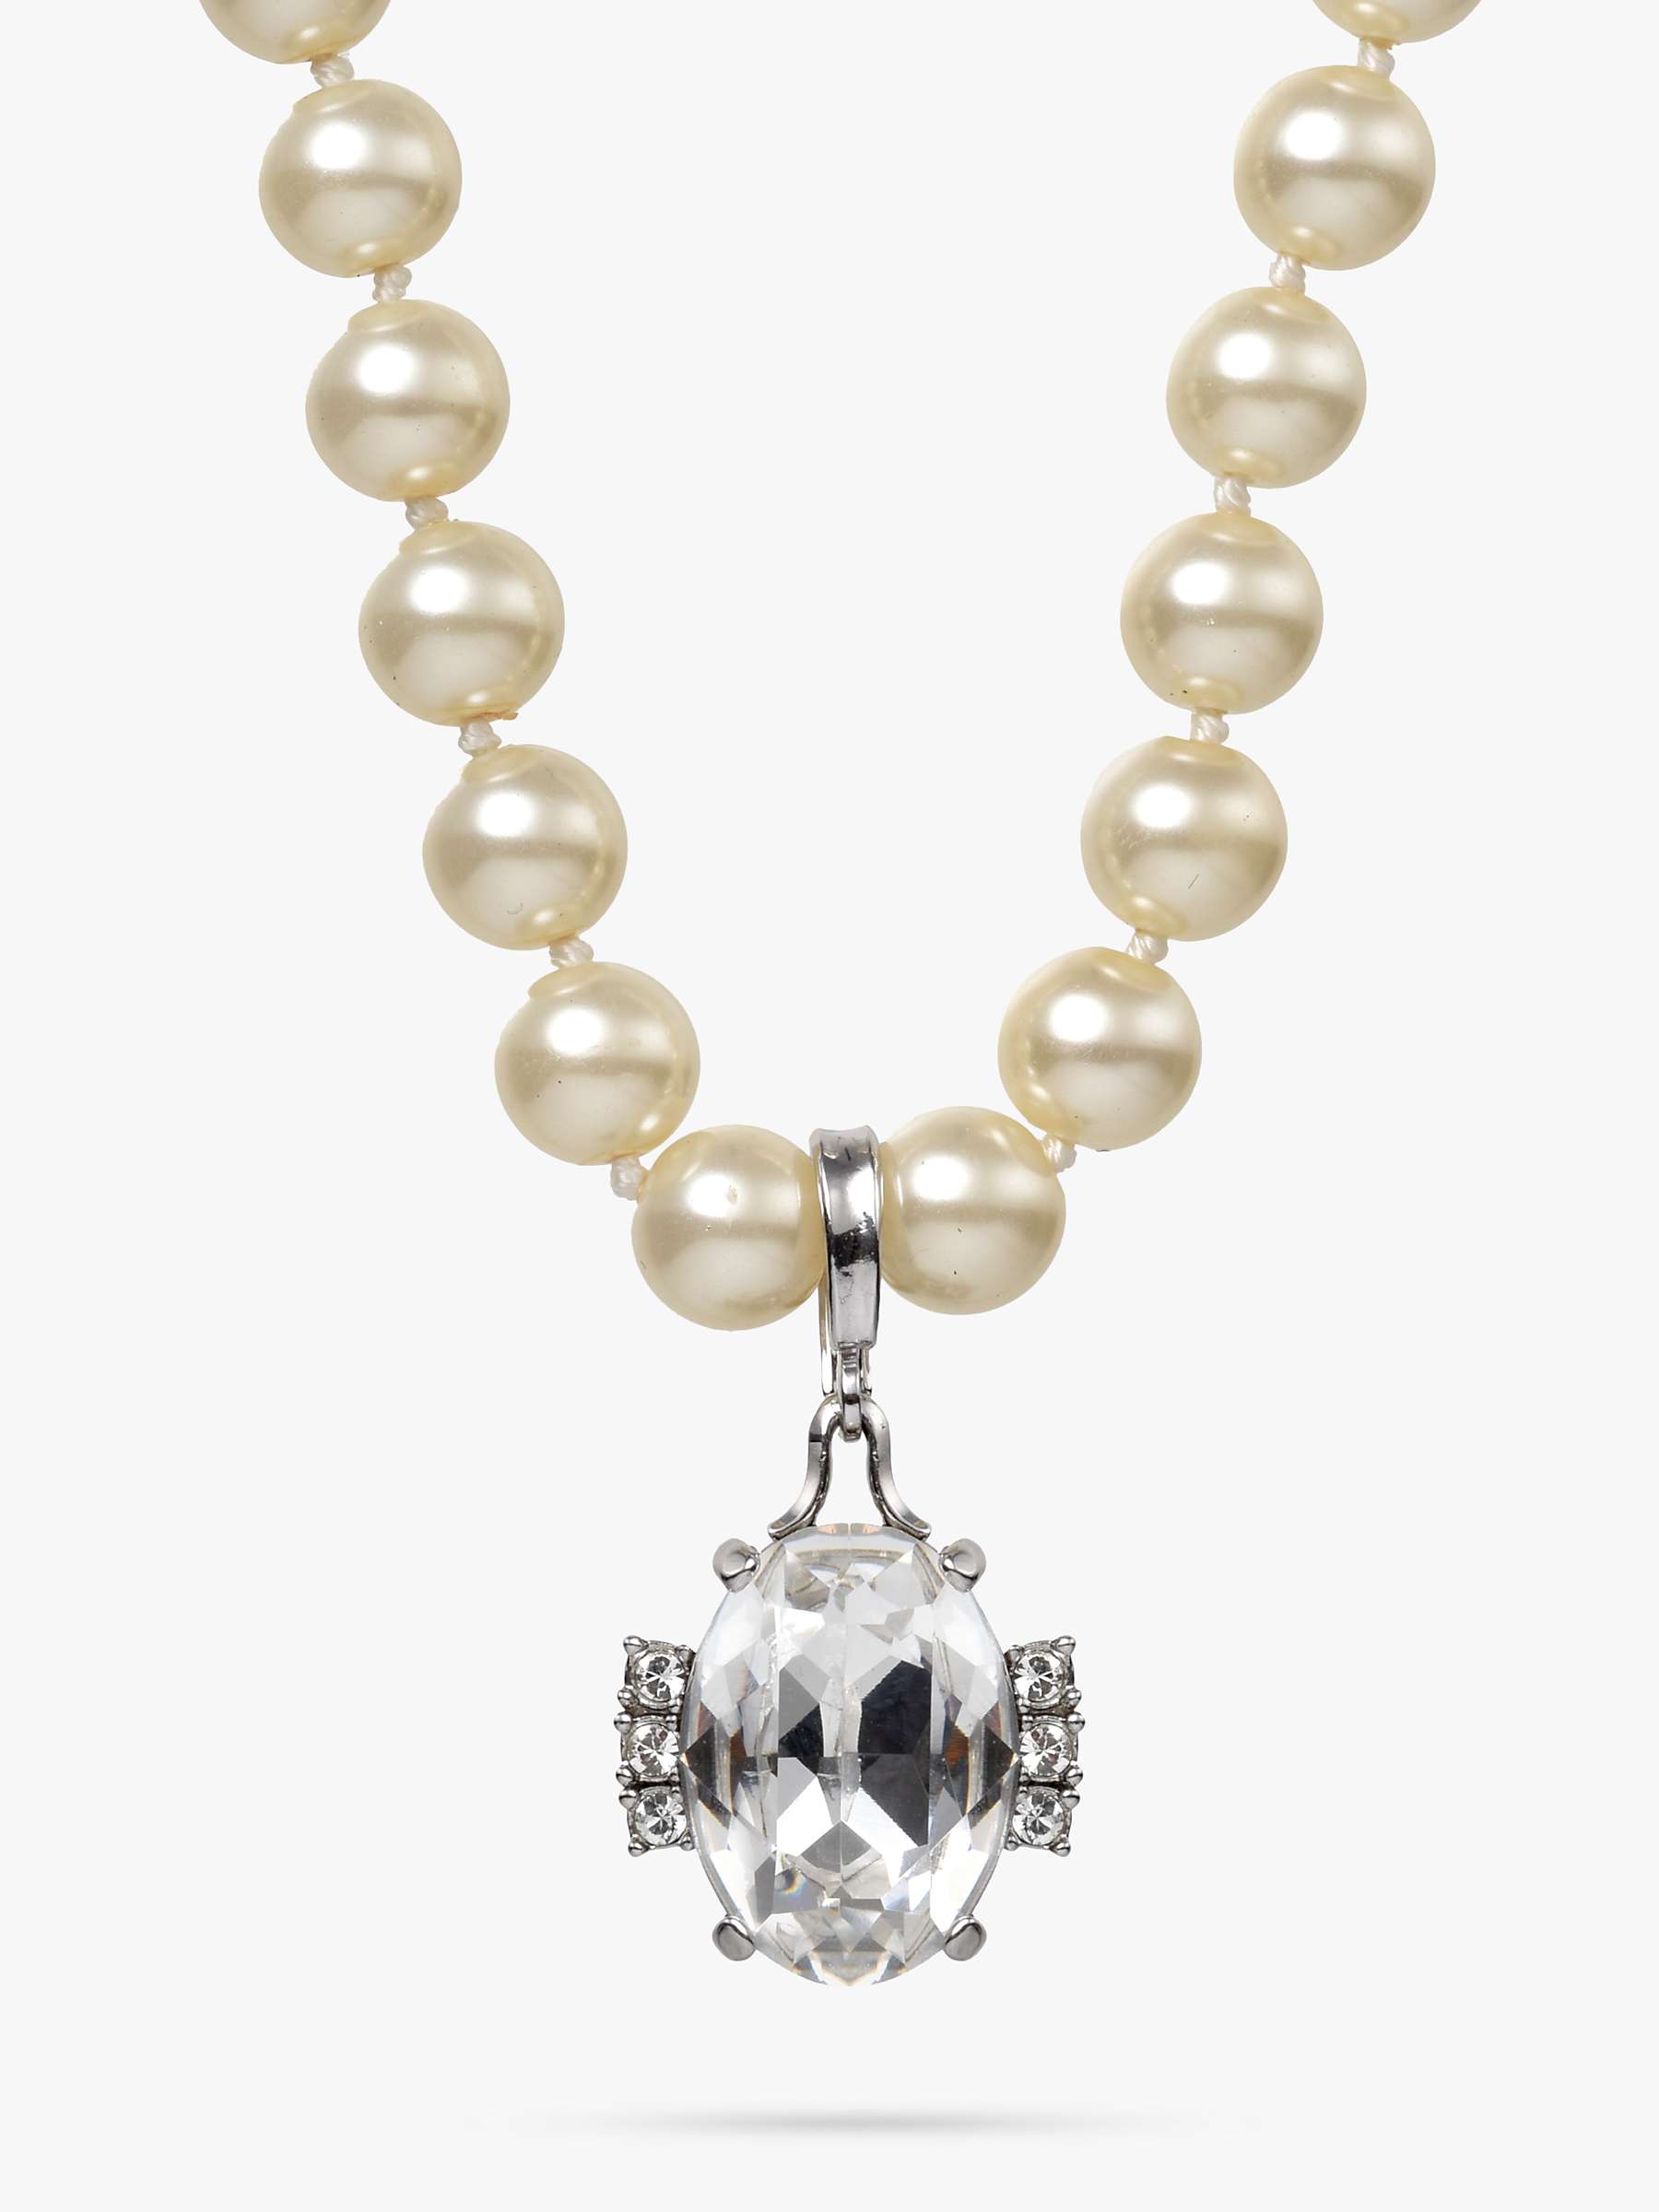 Buy Eclectica Vintage Swarovski Crystal Faux Pearl Necklace, Dated Circa 1980s Online at johnlewis.com